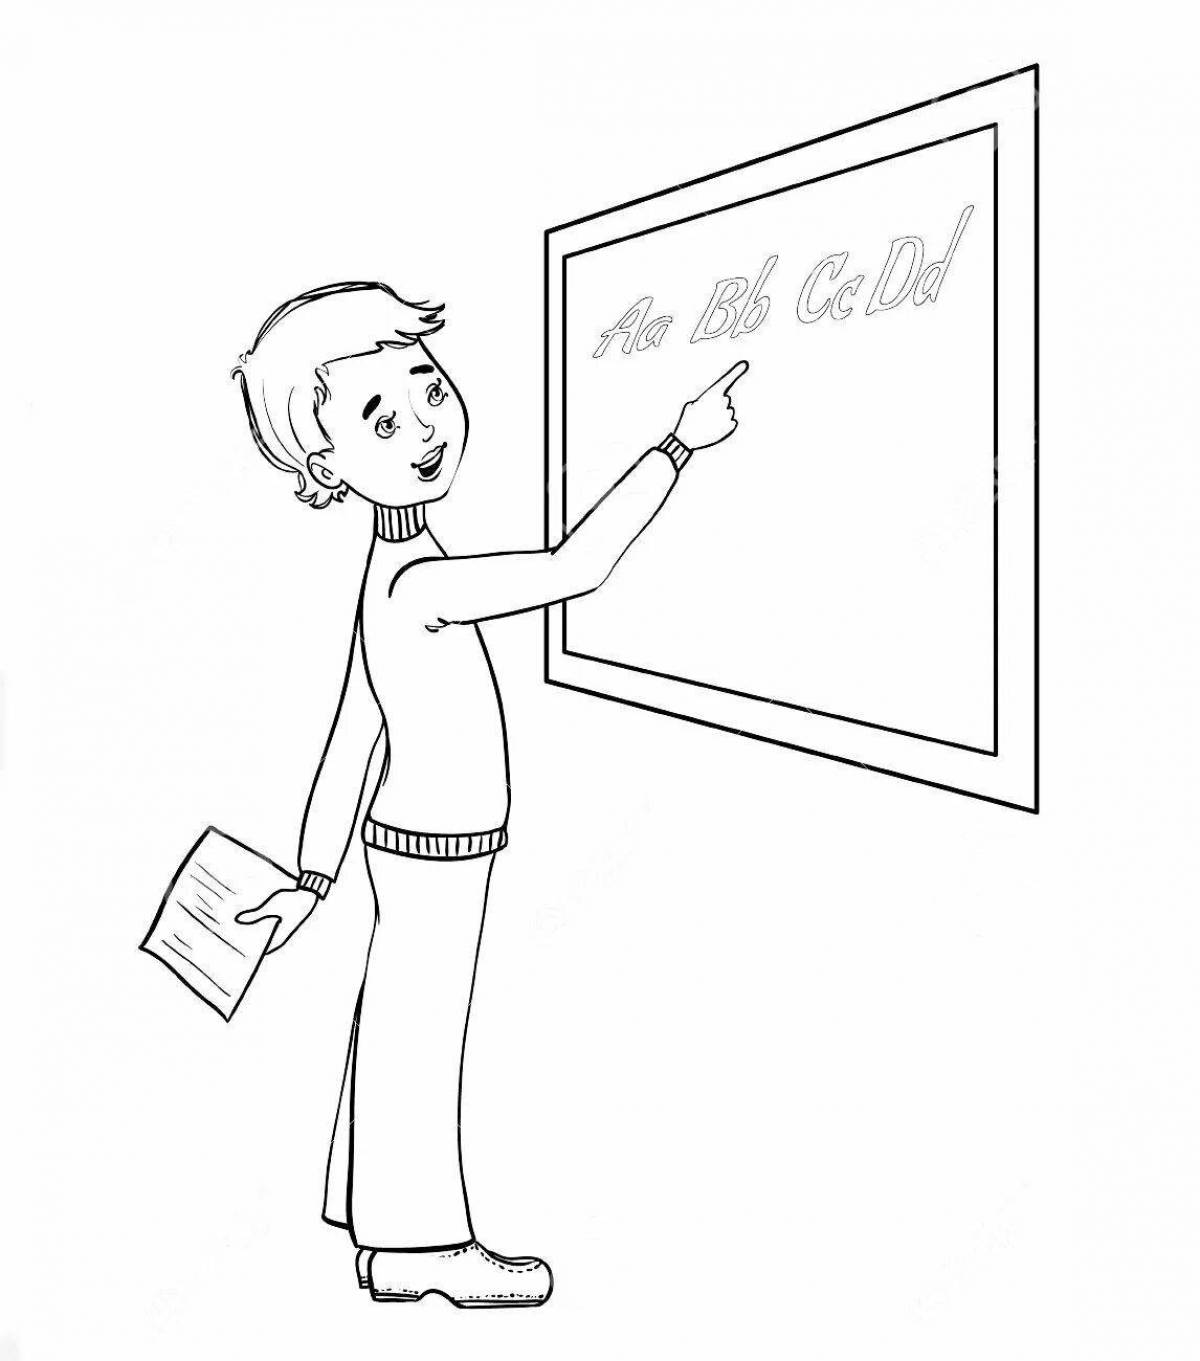 Colorful coloring page for inspiration when learning is fun